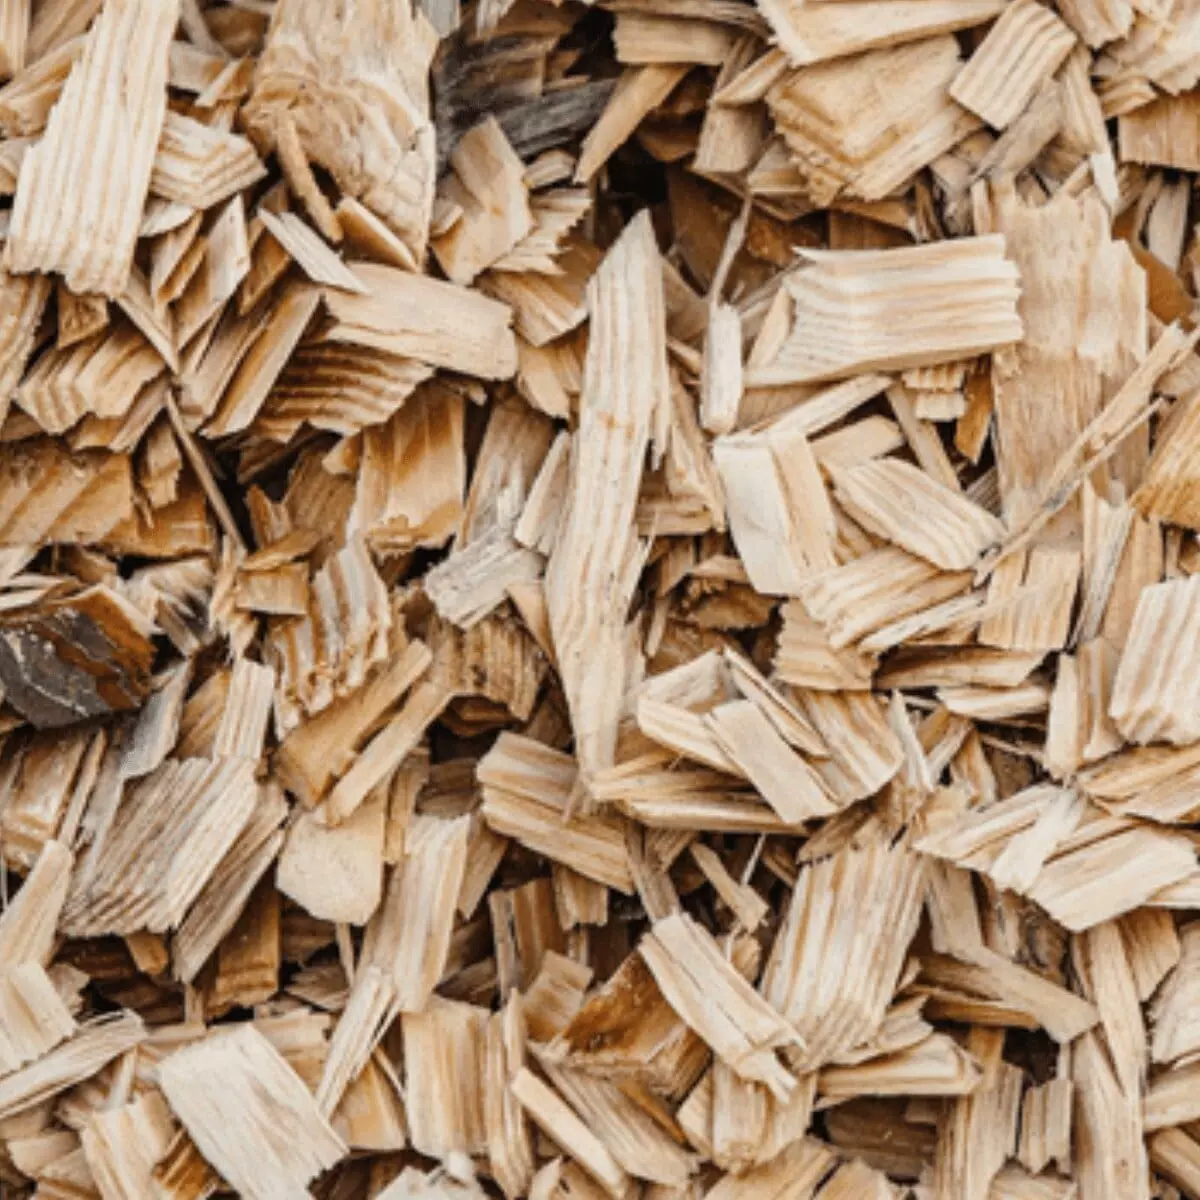 What are woodchips used for?